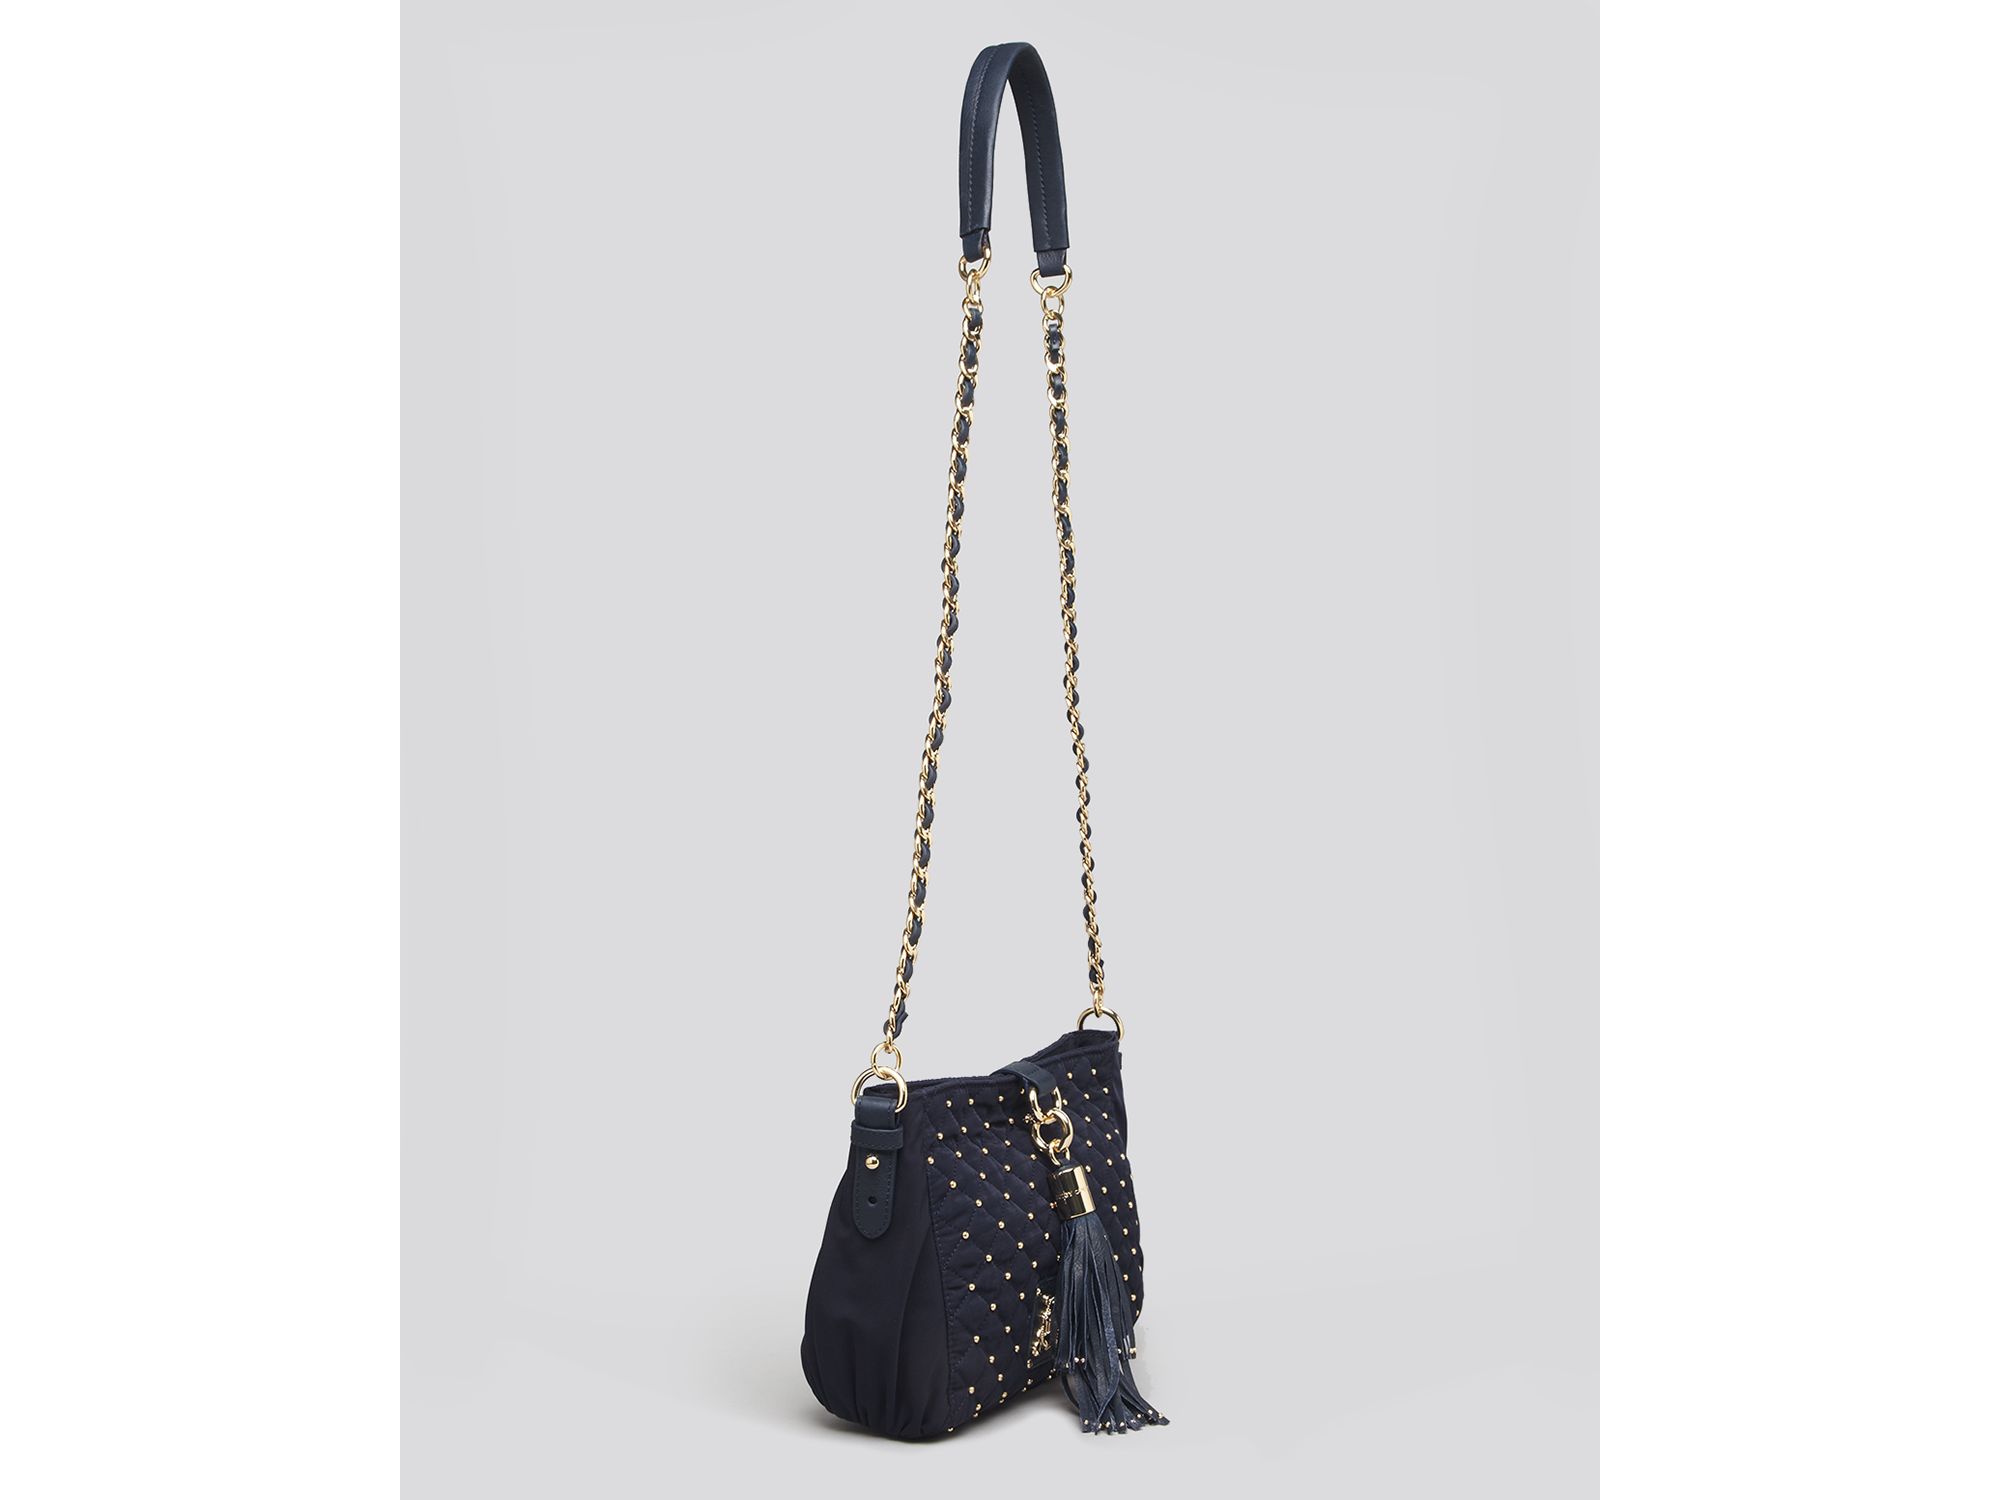 Juicy Couture Quilted Nylon Crossbody Bag in Blue - Lyst